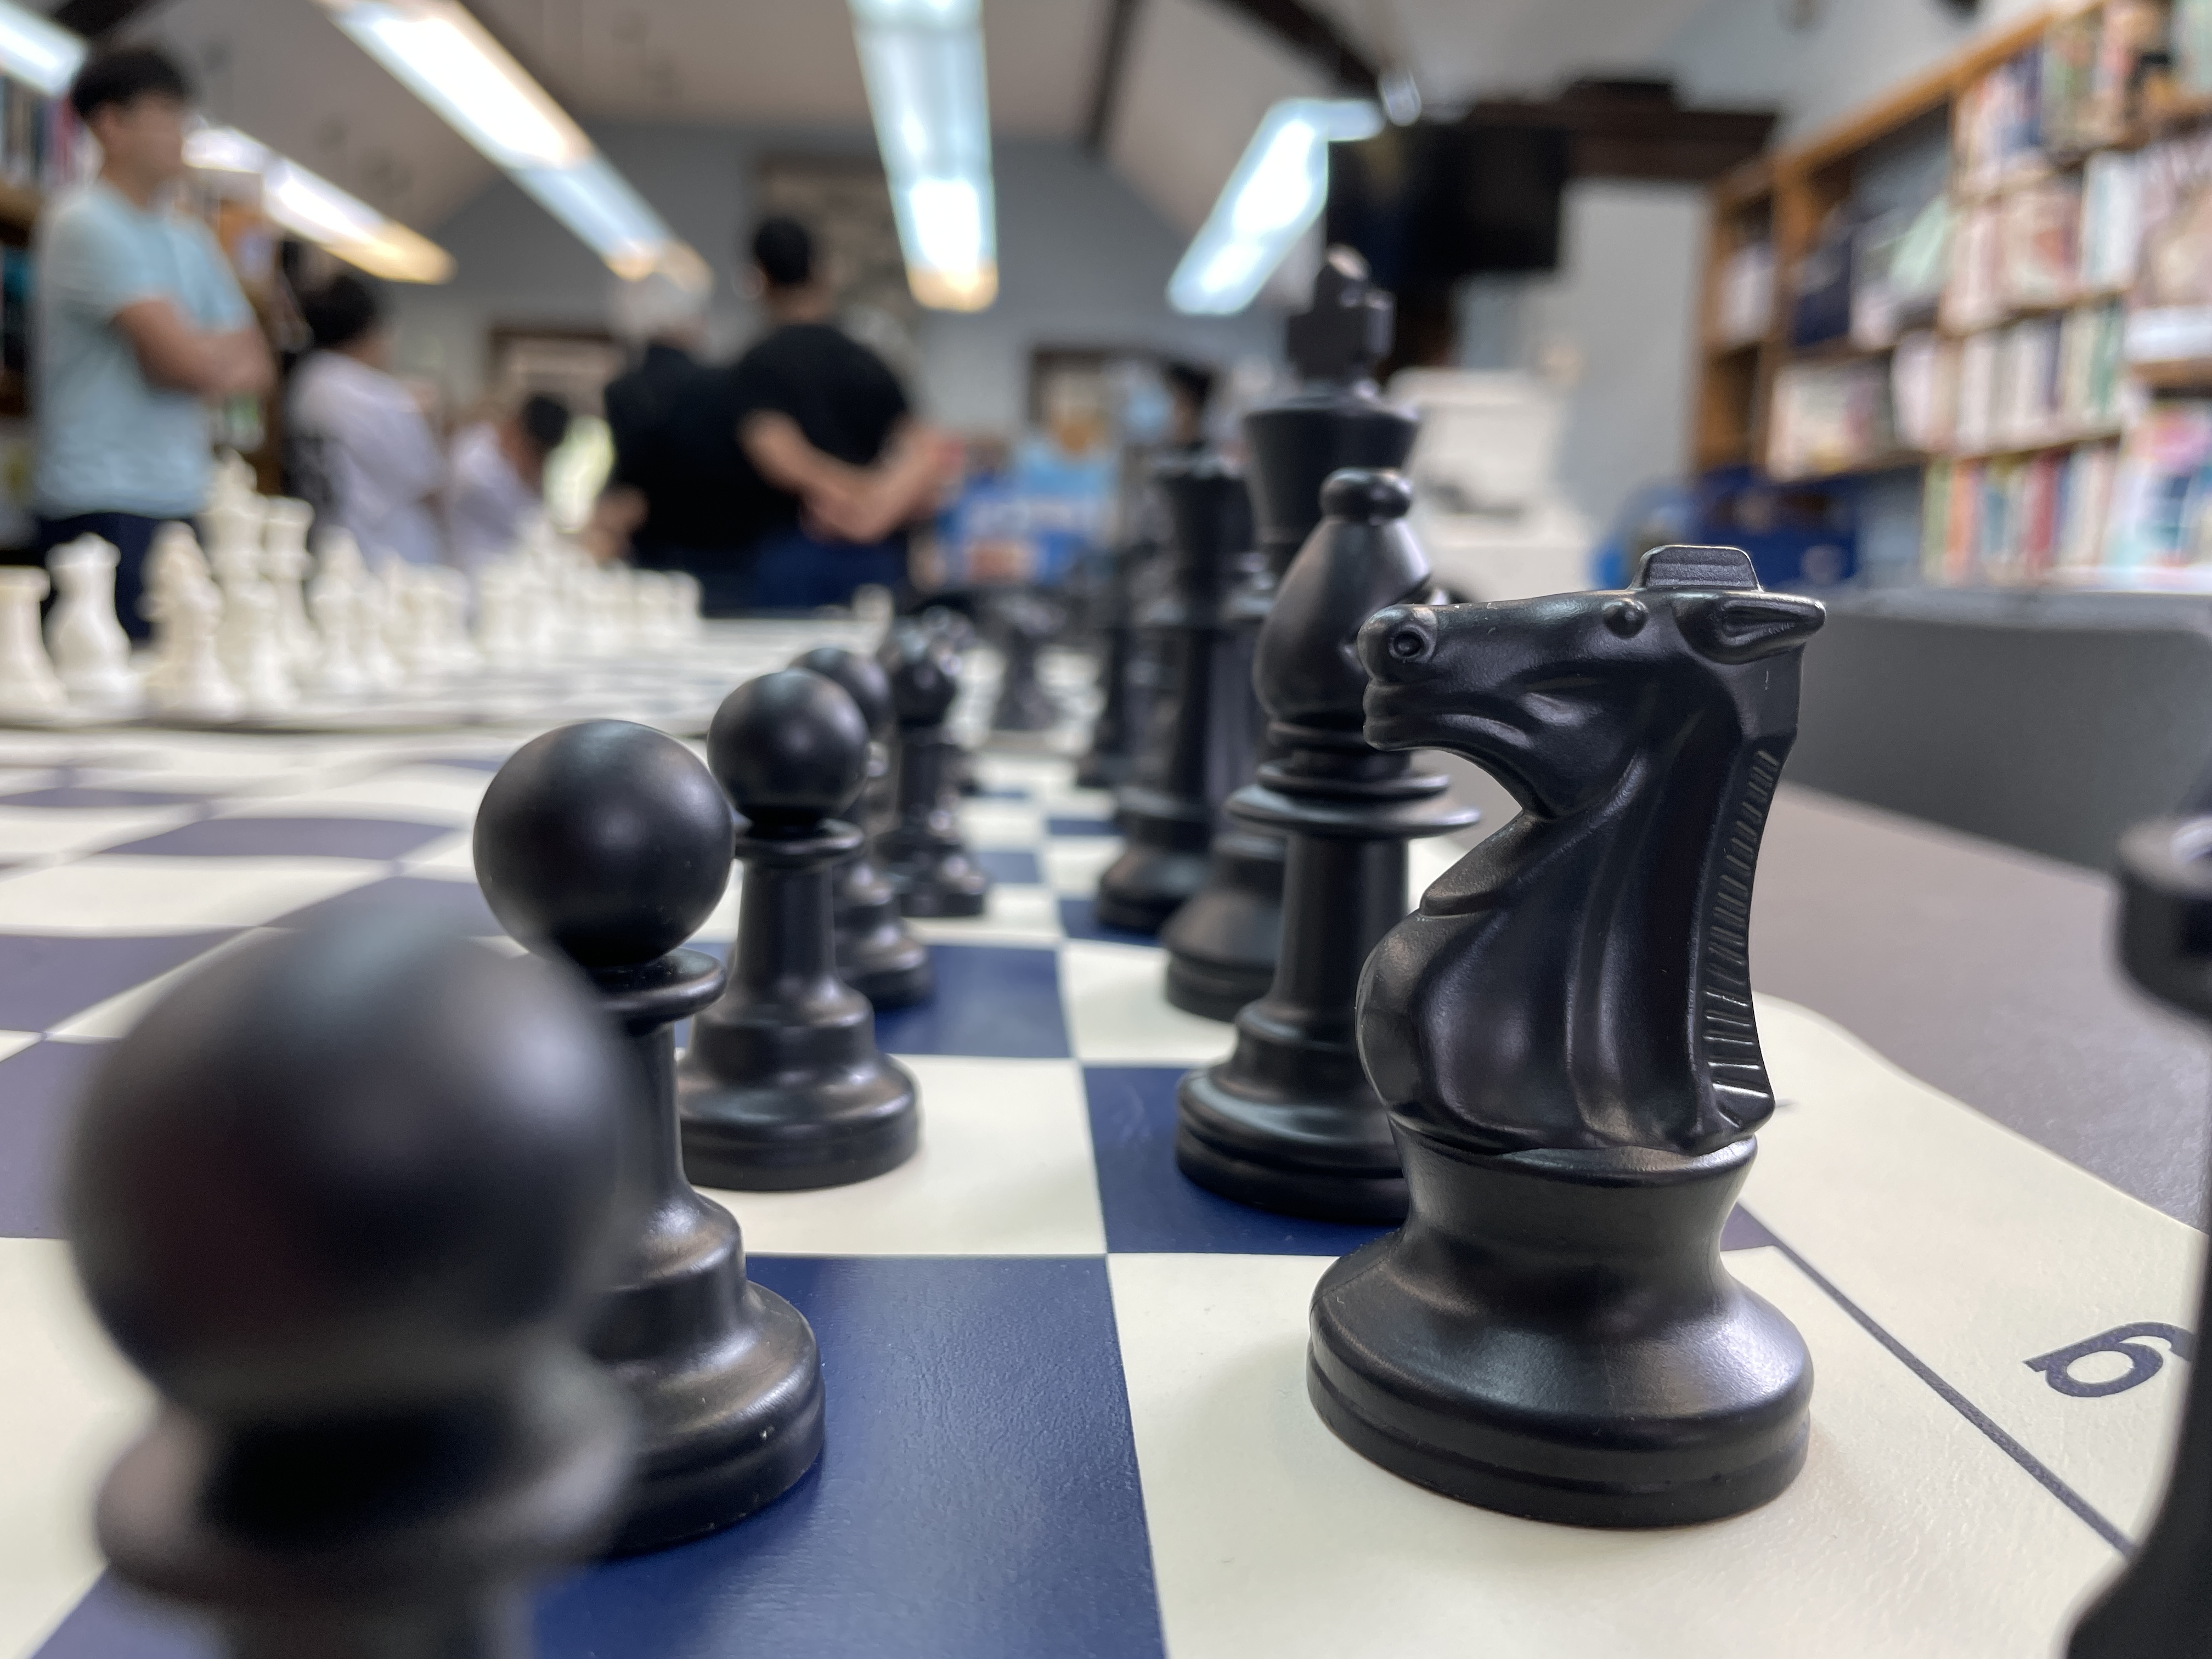 Image of chess pieces